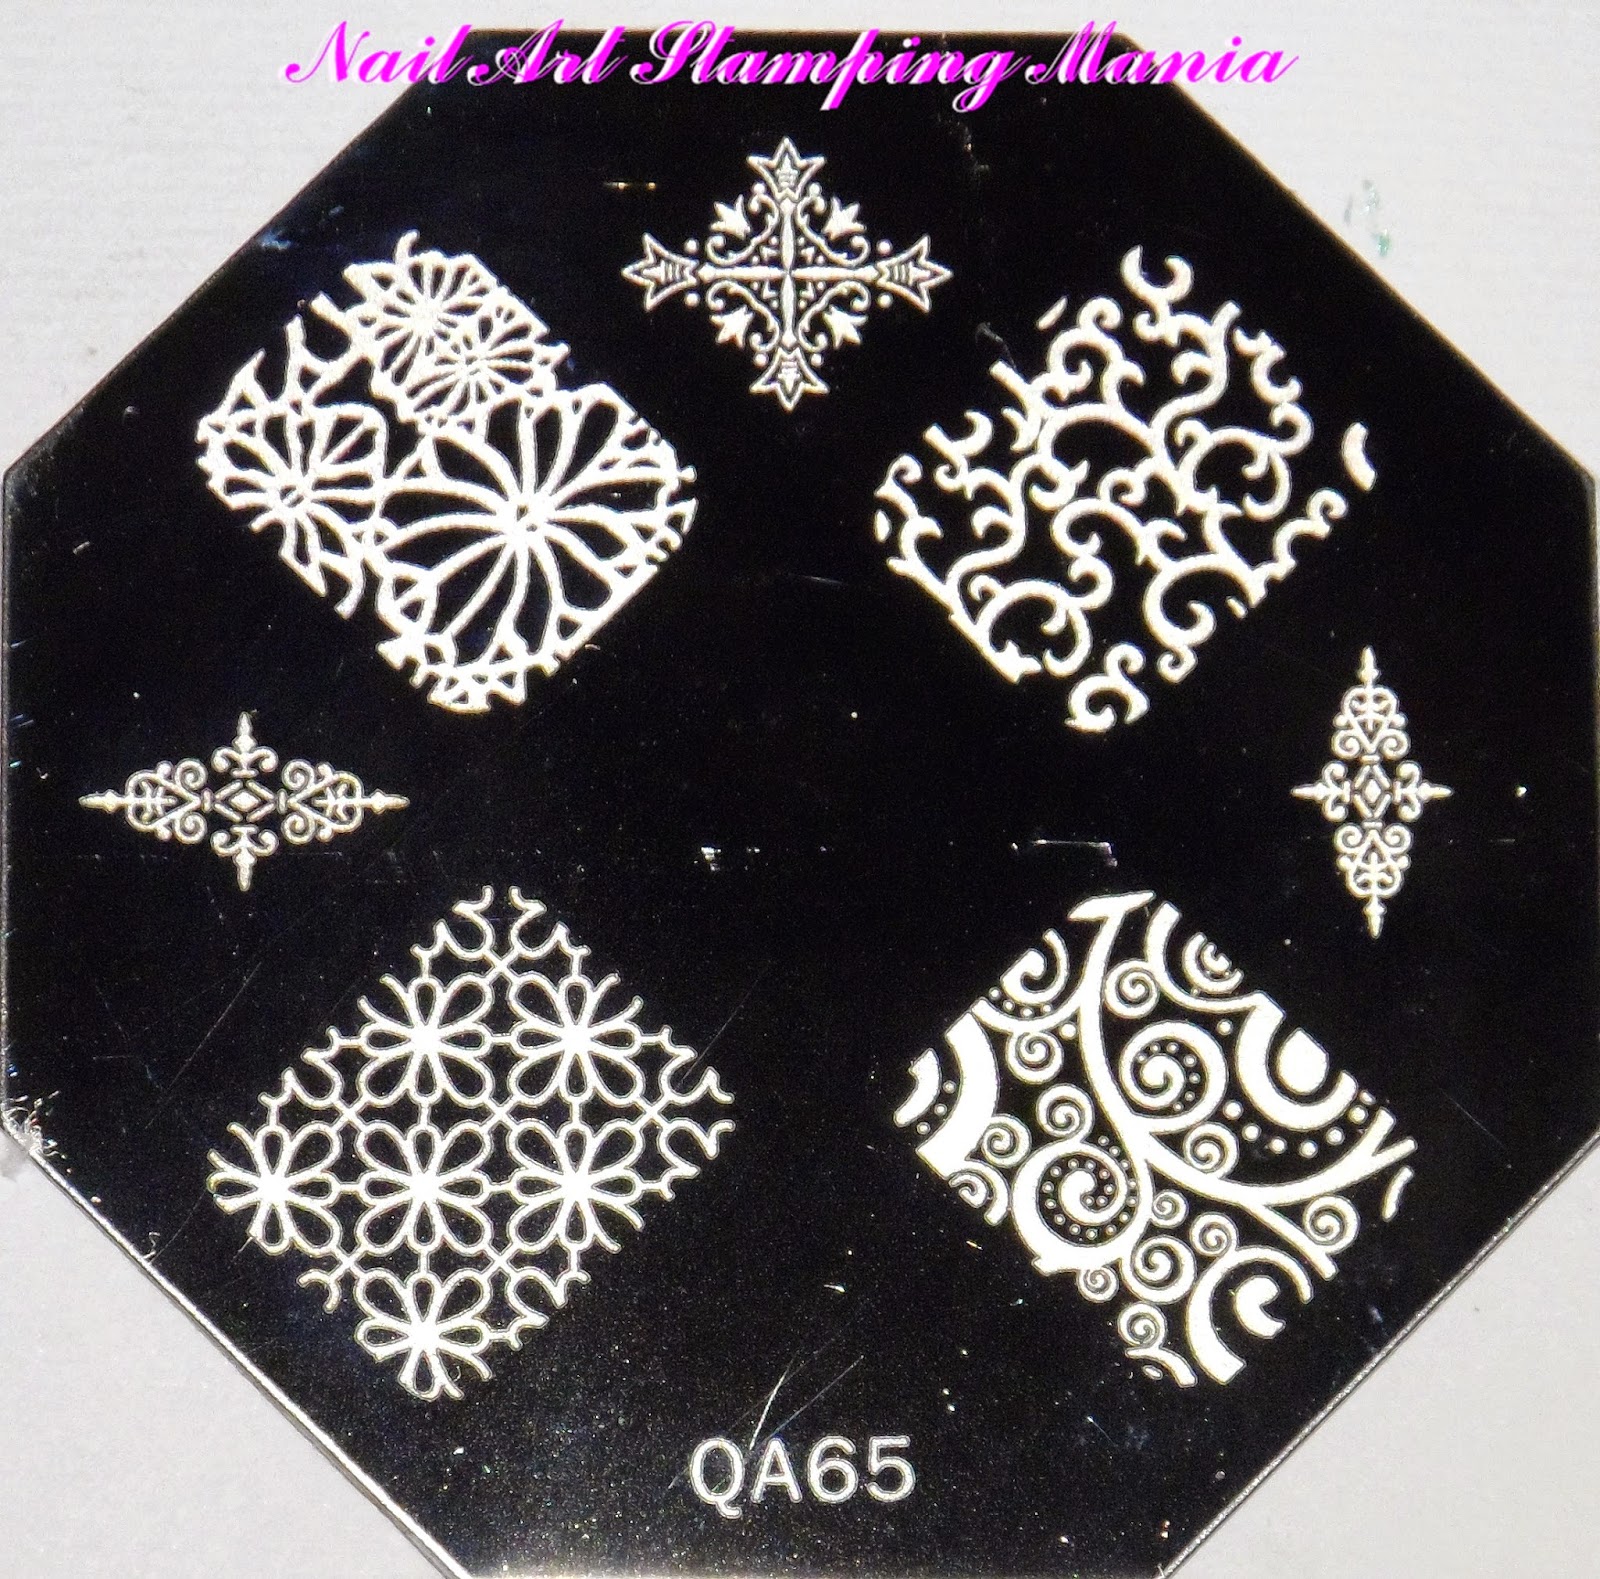 Nail Art Stamping Mania: Stamping With Foil And QA Plates